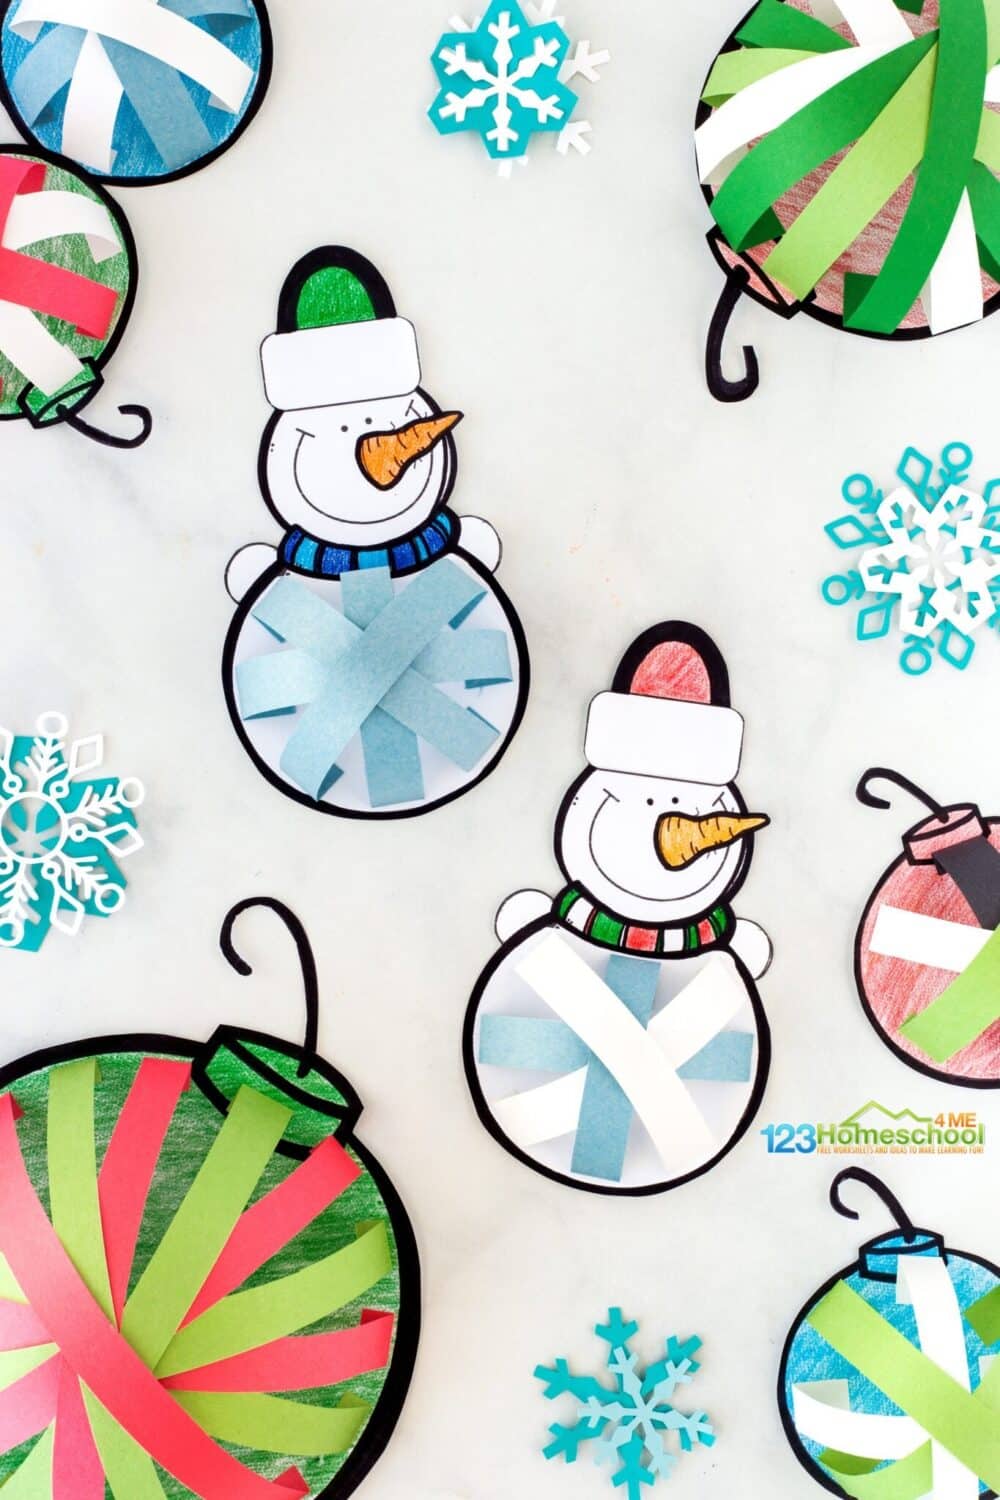 A photo of cute printable preschool ornament crafts featuring paper snowmen and Christmas baubles with three-dimensional details made out of colored paper.